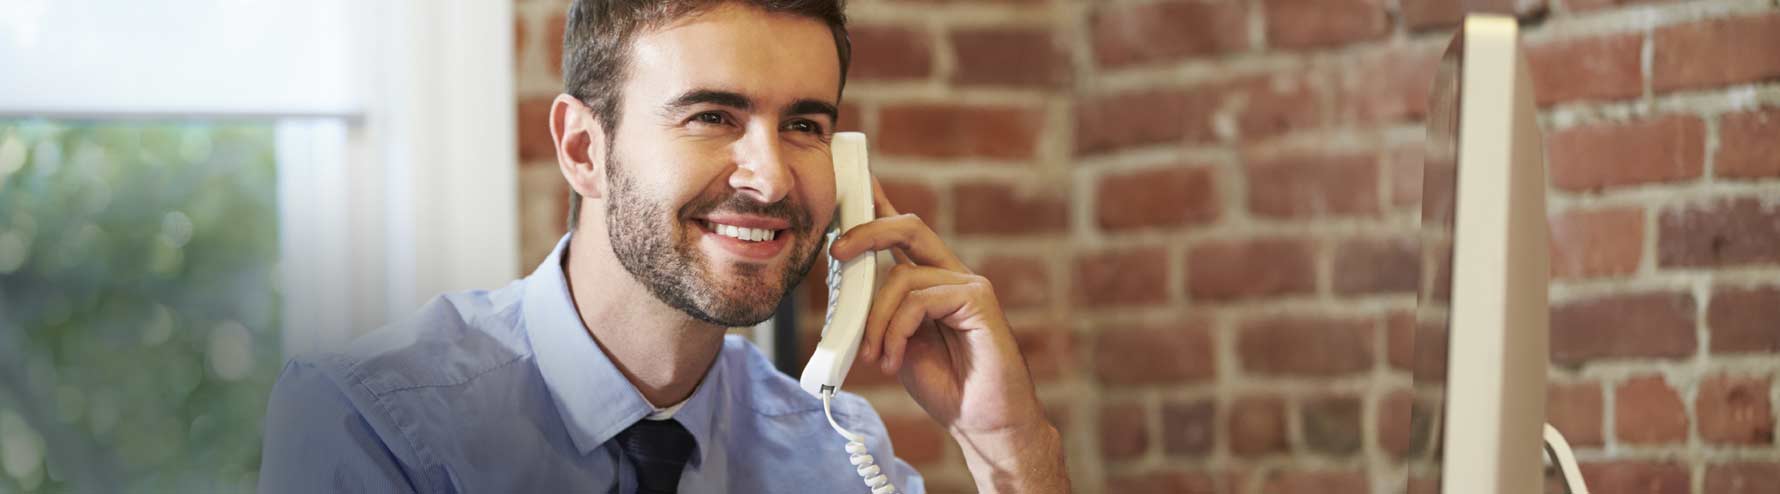 Smiling business man on phone in office